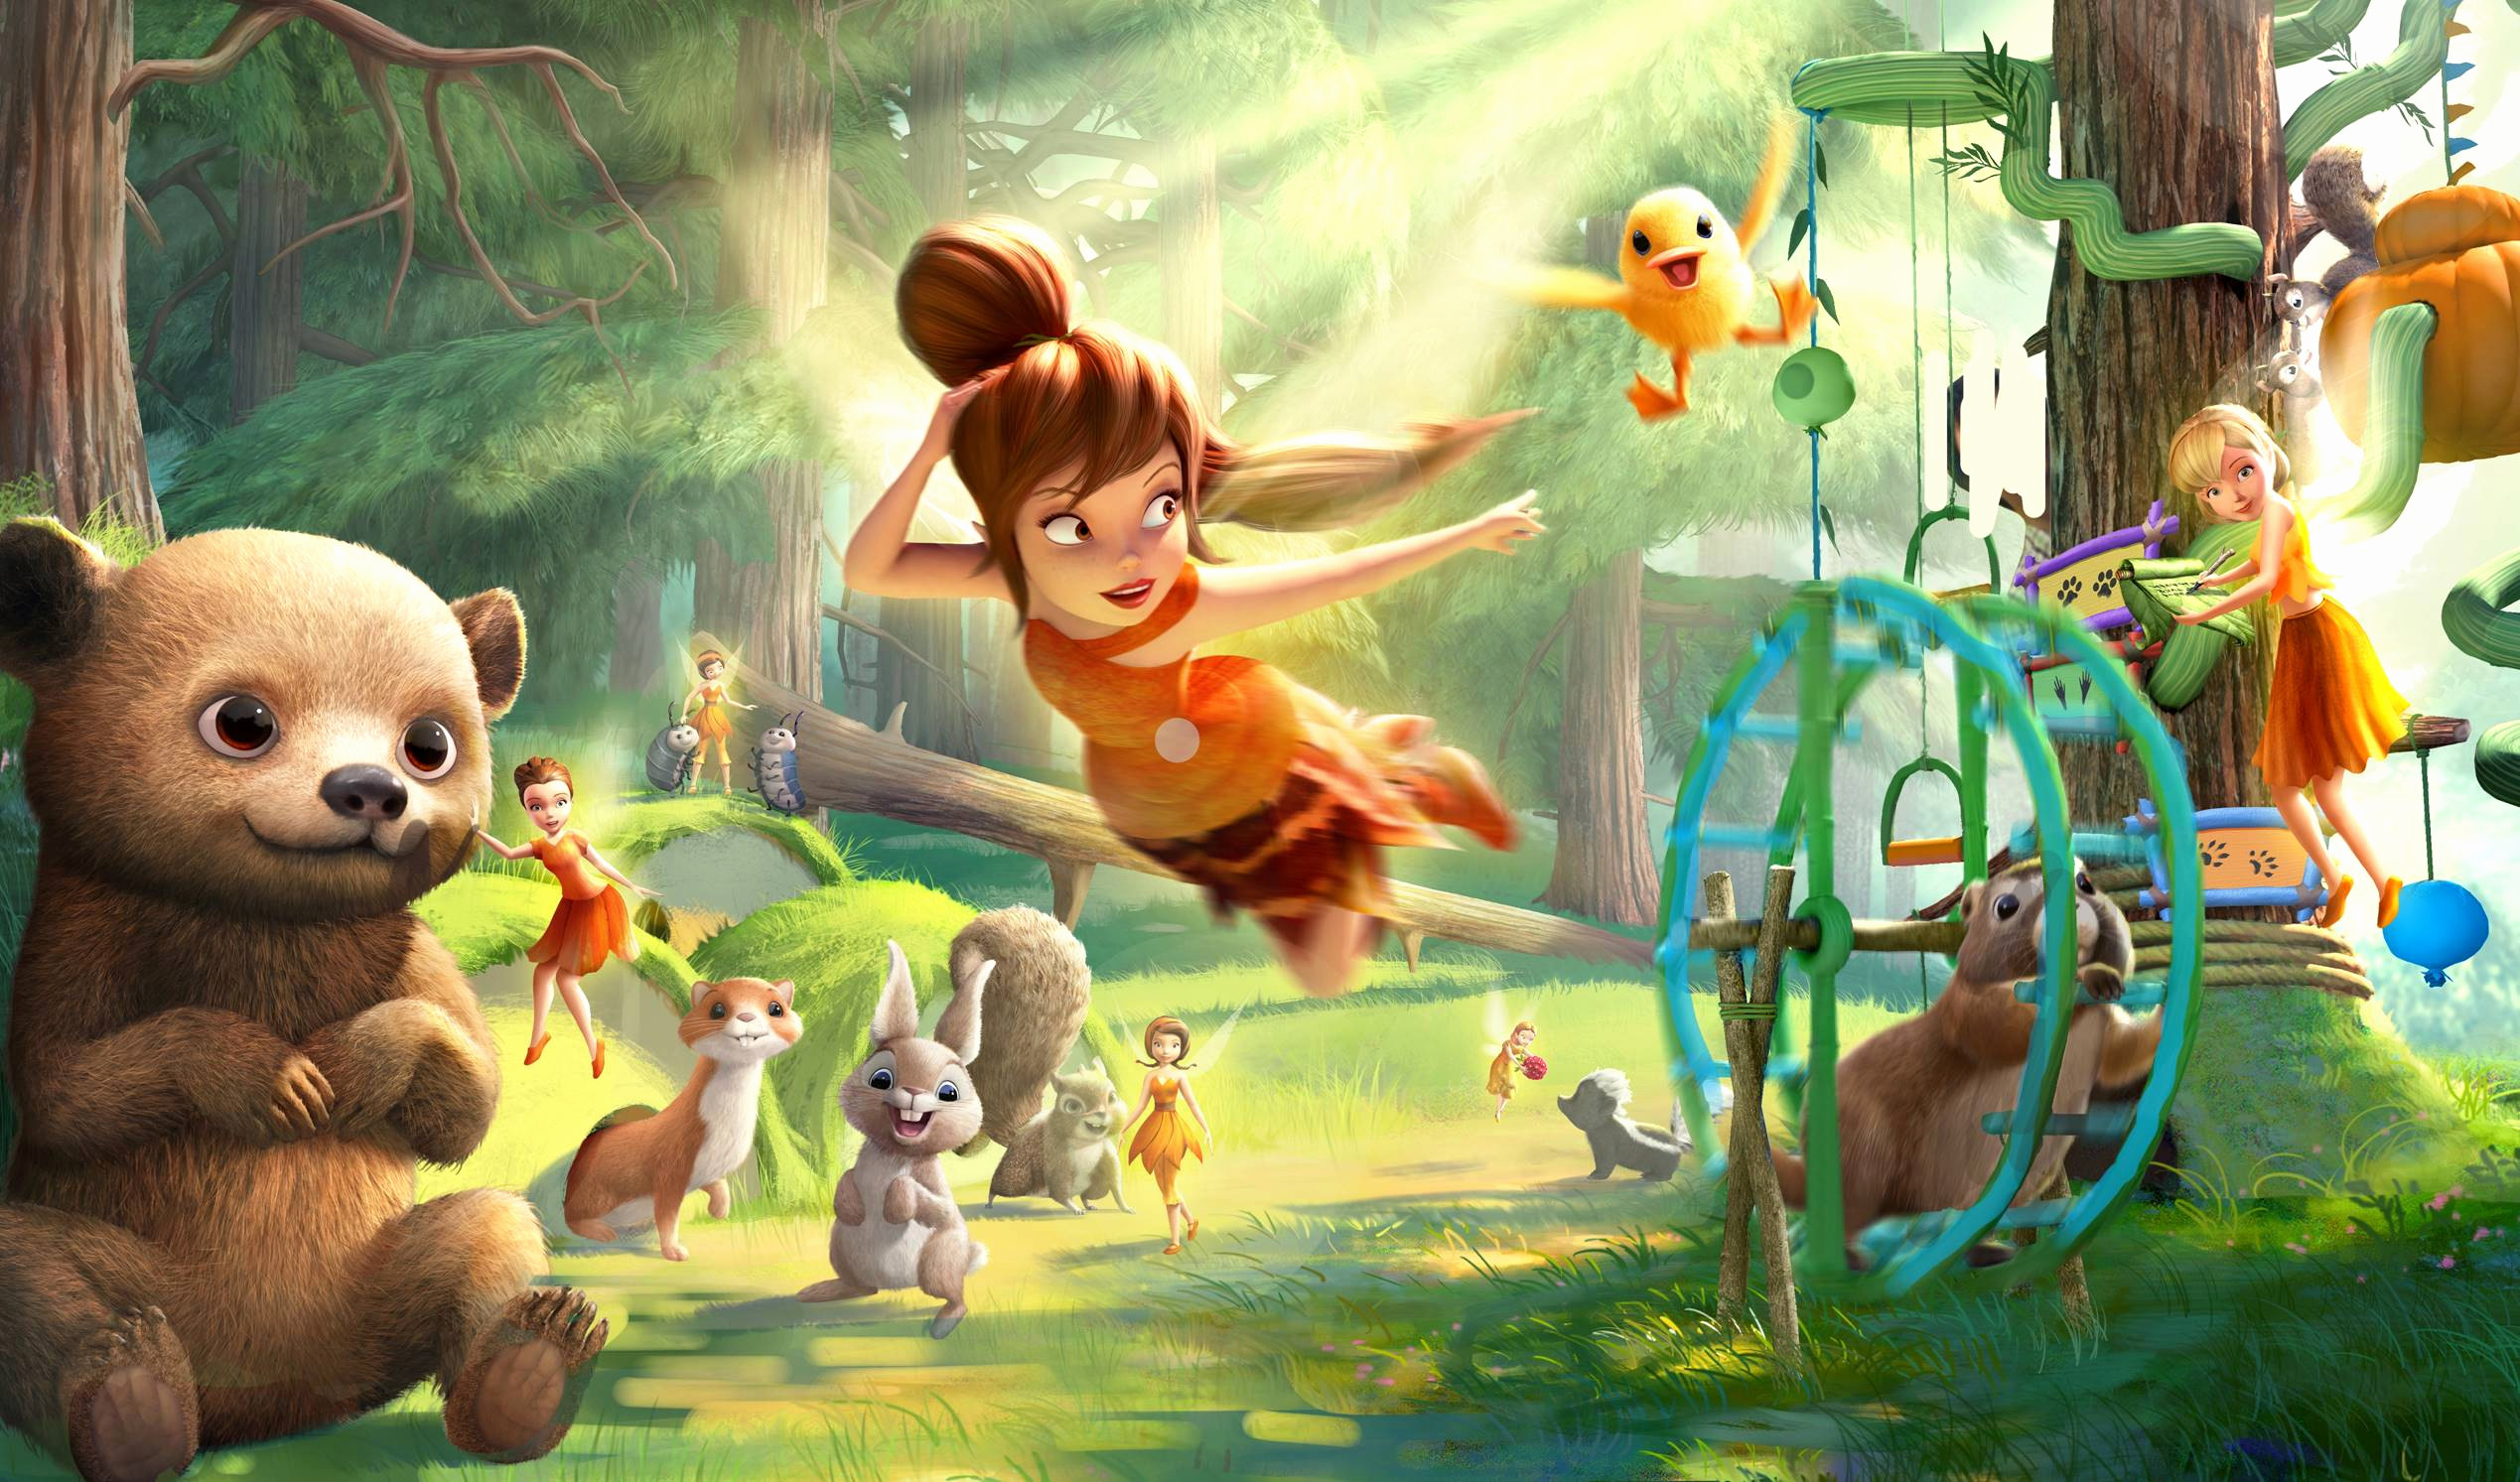 Download Tinkerbell 4 Qartulad, Tinkerbell 4 Wheeler - Tinkerbell And The Legend Of The Neverbeast , HD Wallpaper & Backgrounds